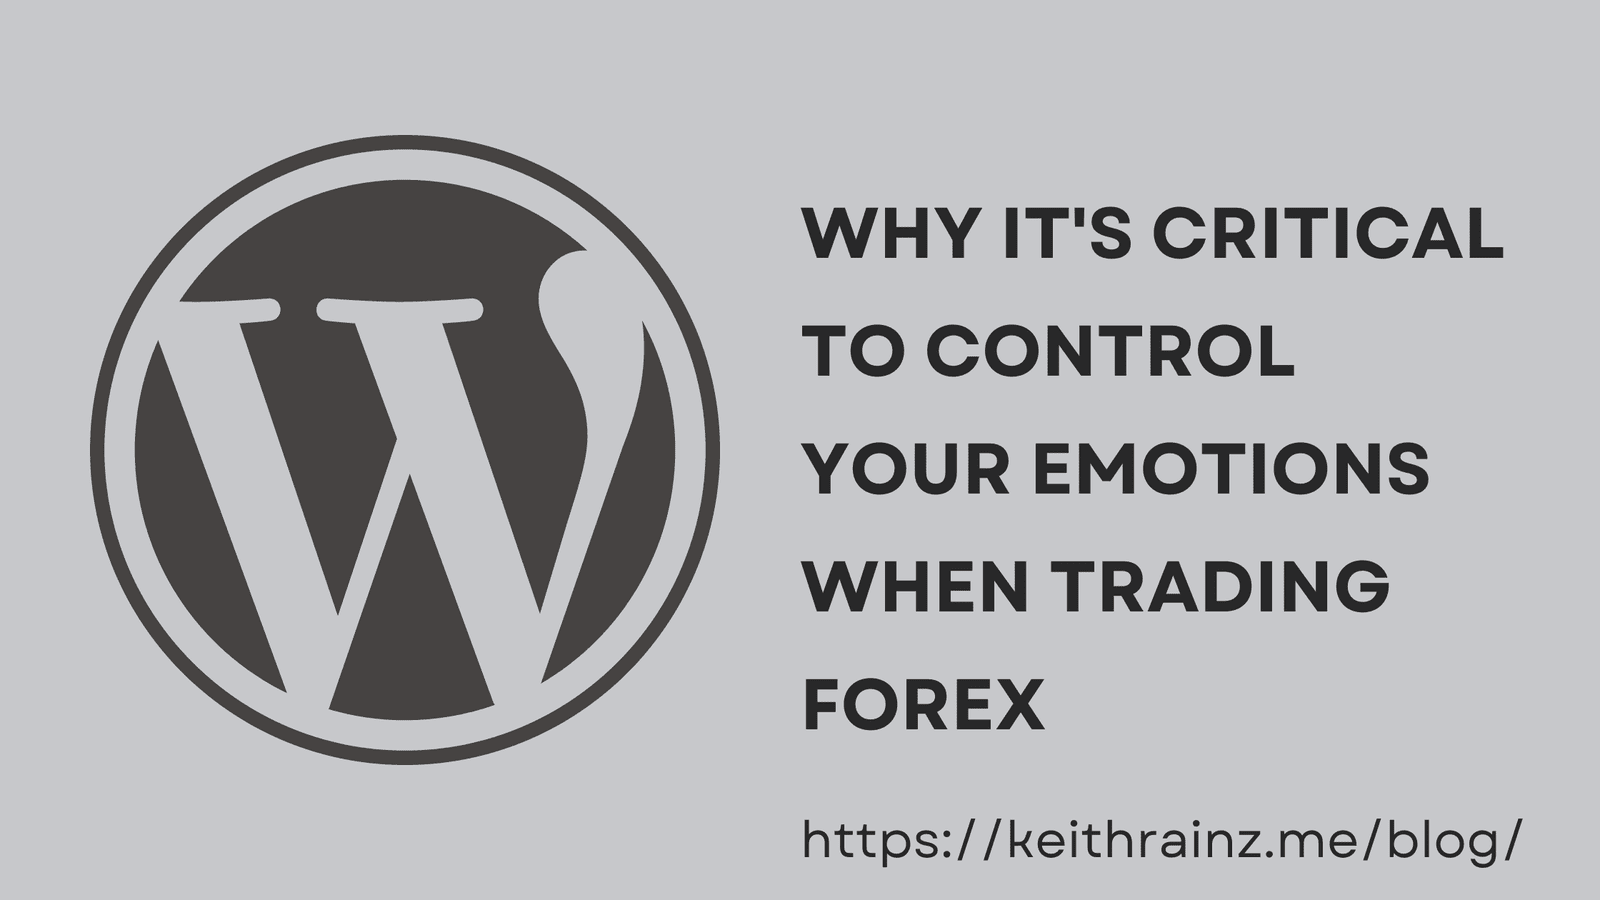 Why it's critical to control your emotions when trading forex